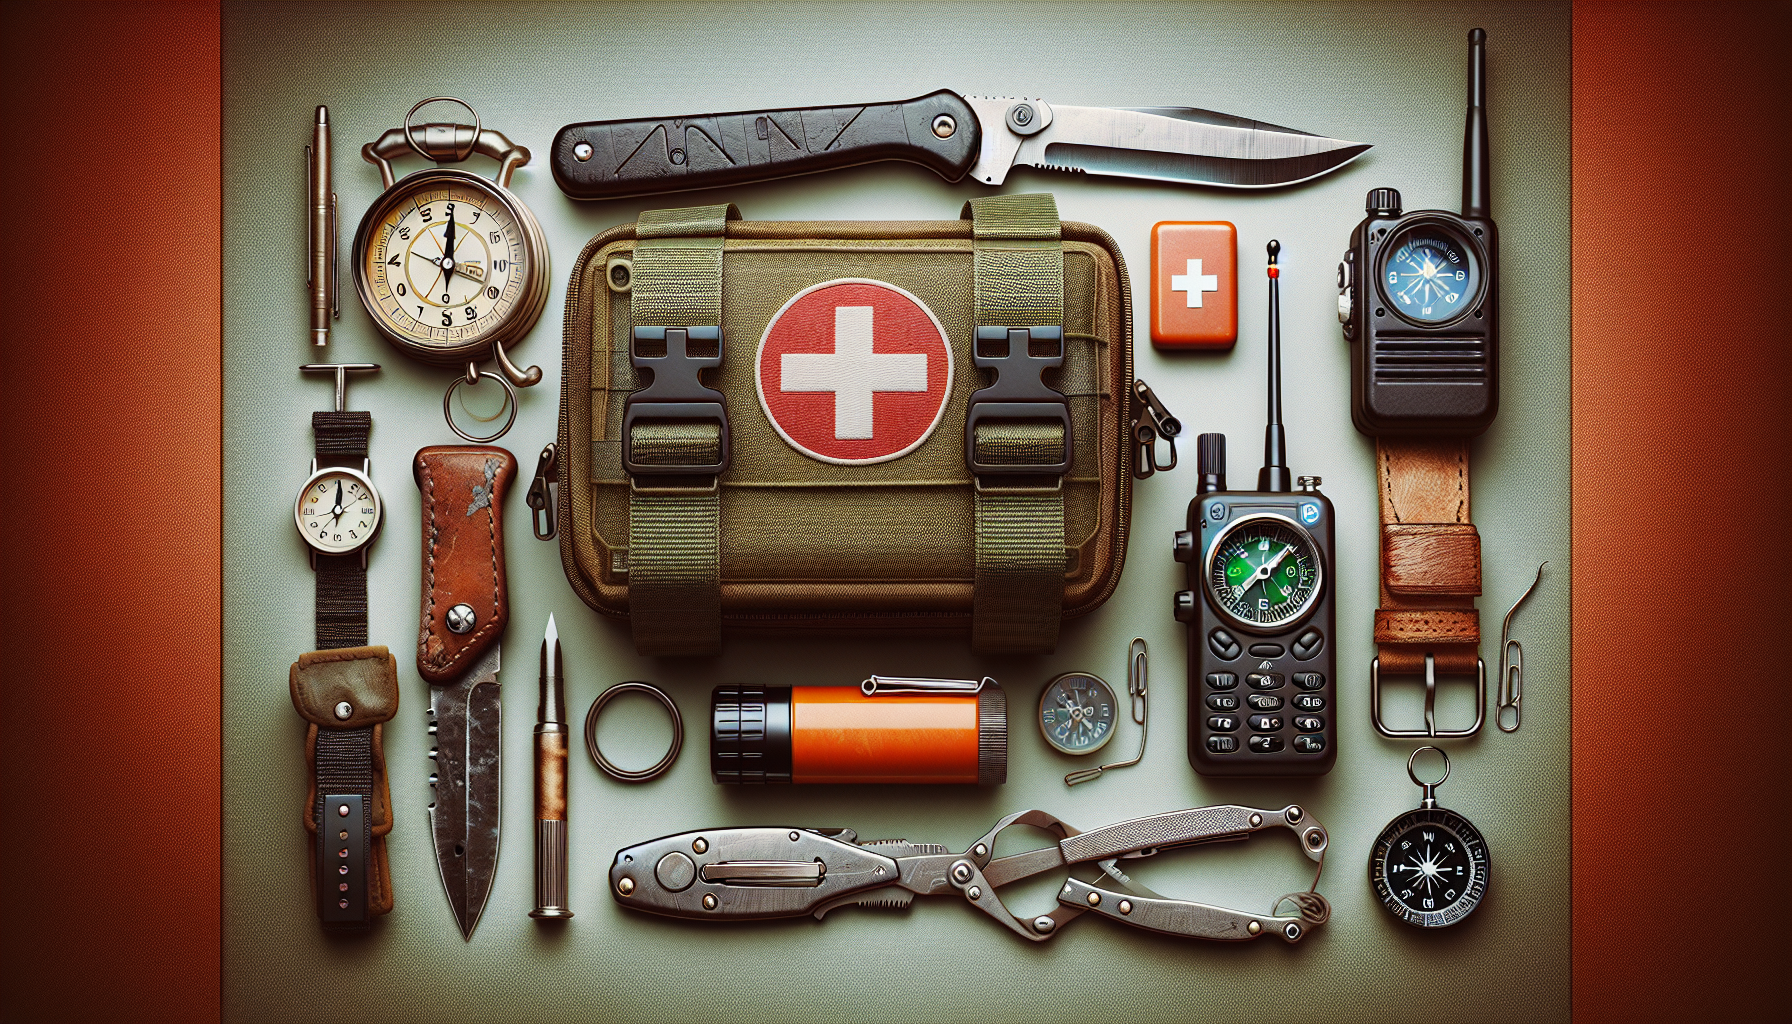 Essential Skills For Emergency Response And Survival